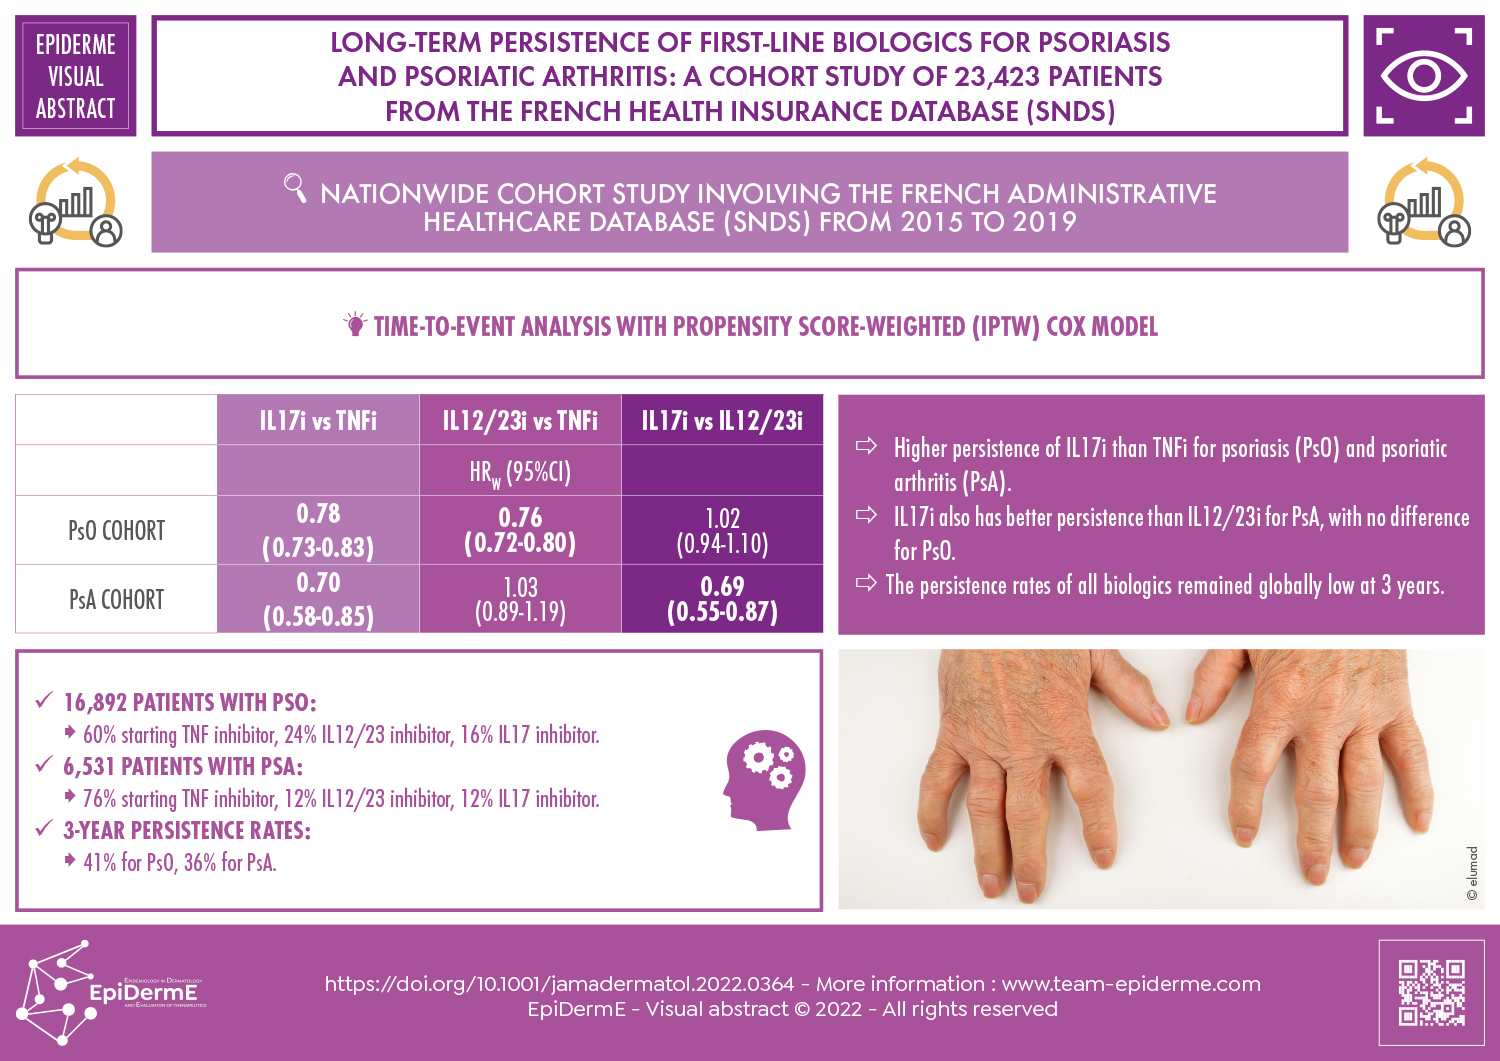 Long-term persistence of second-line biologics in psoriatic arthritis patients with prior TNF inhibitor exposure: a nationwide cohort study from the French health insurance database (SNDS)